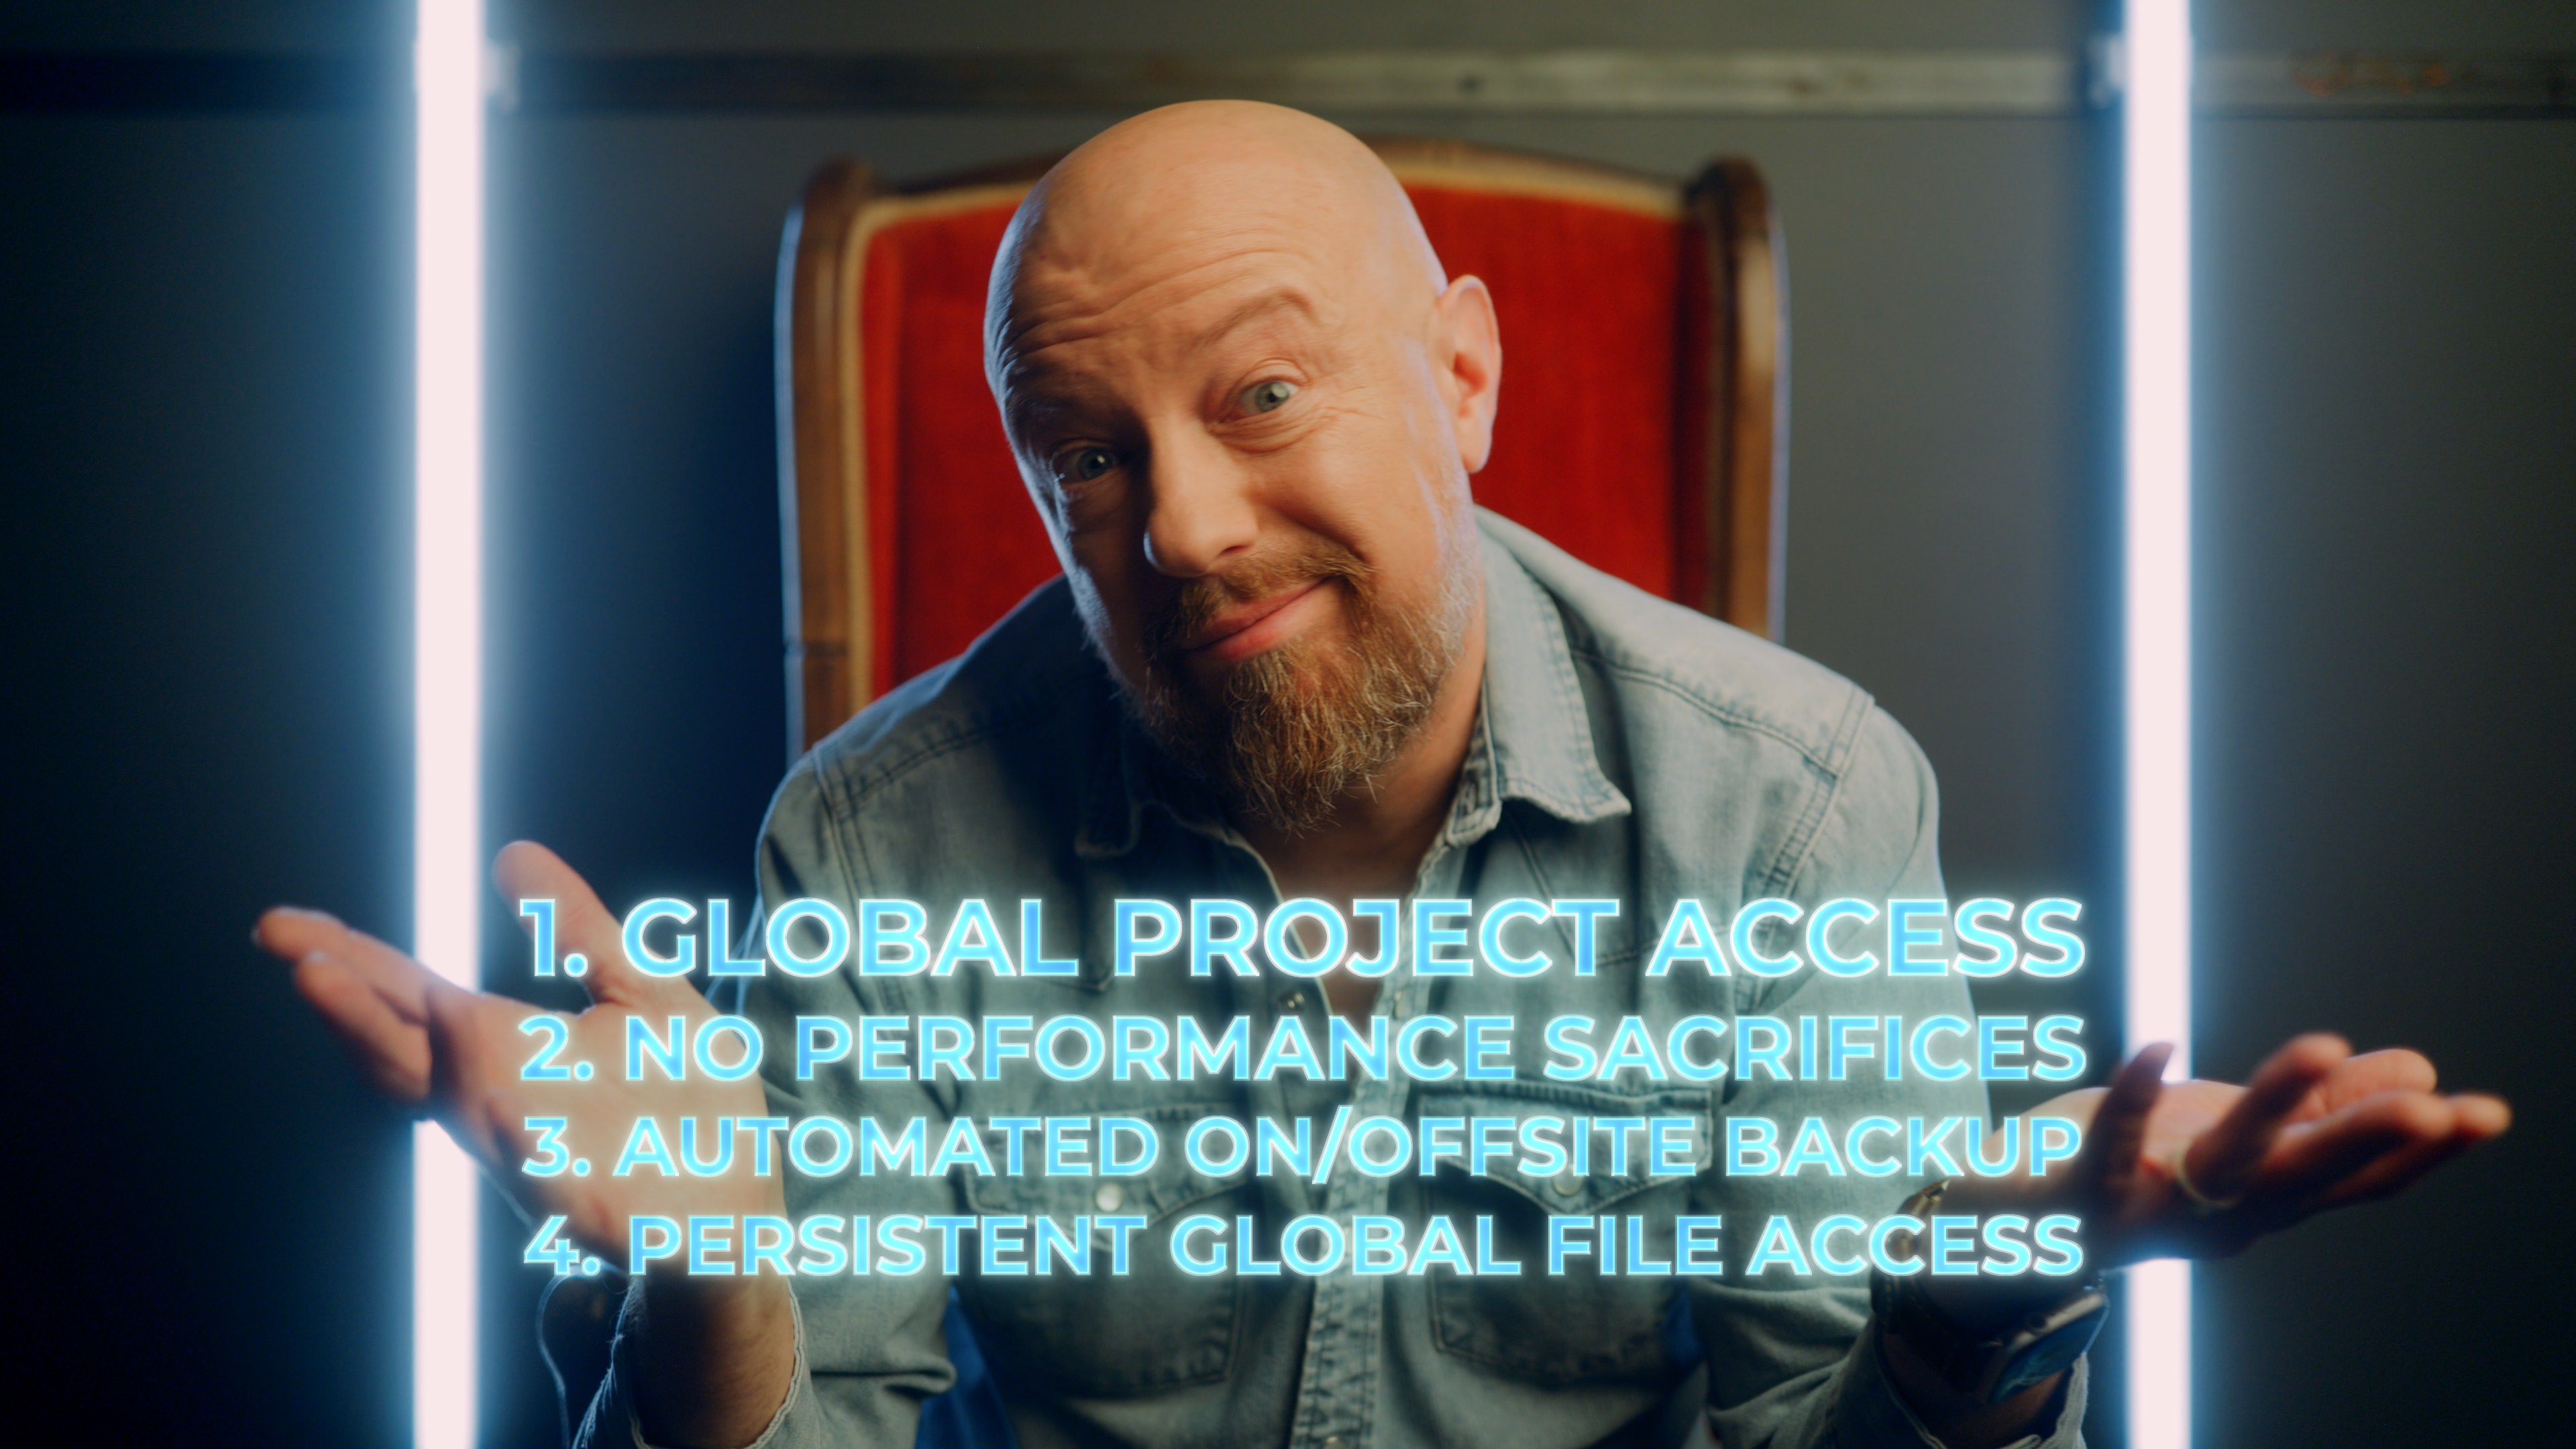 1. GLOBAL PROJECT ACCESS 2. NO PERFORMANCE SACRIFICES 3. AUTOMATED ON/OFFSITE BACKUP 4. PERSISTENT GLOBAL FILE ACCESS